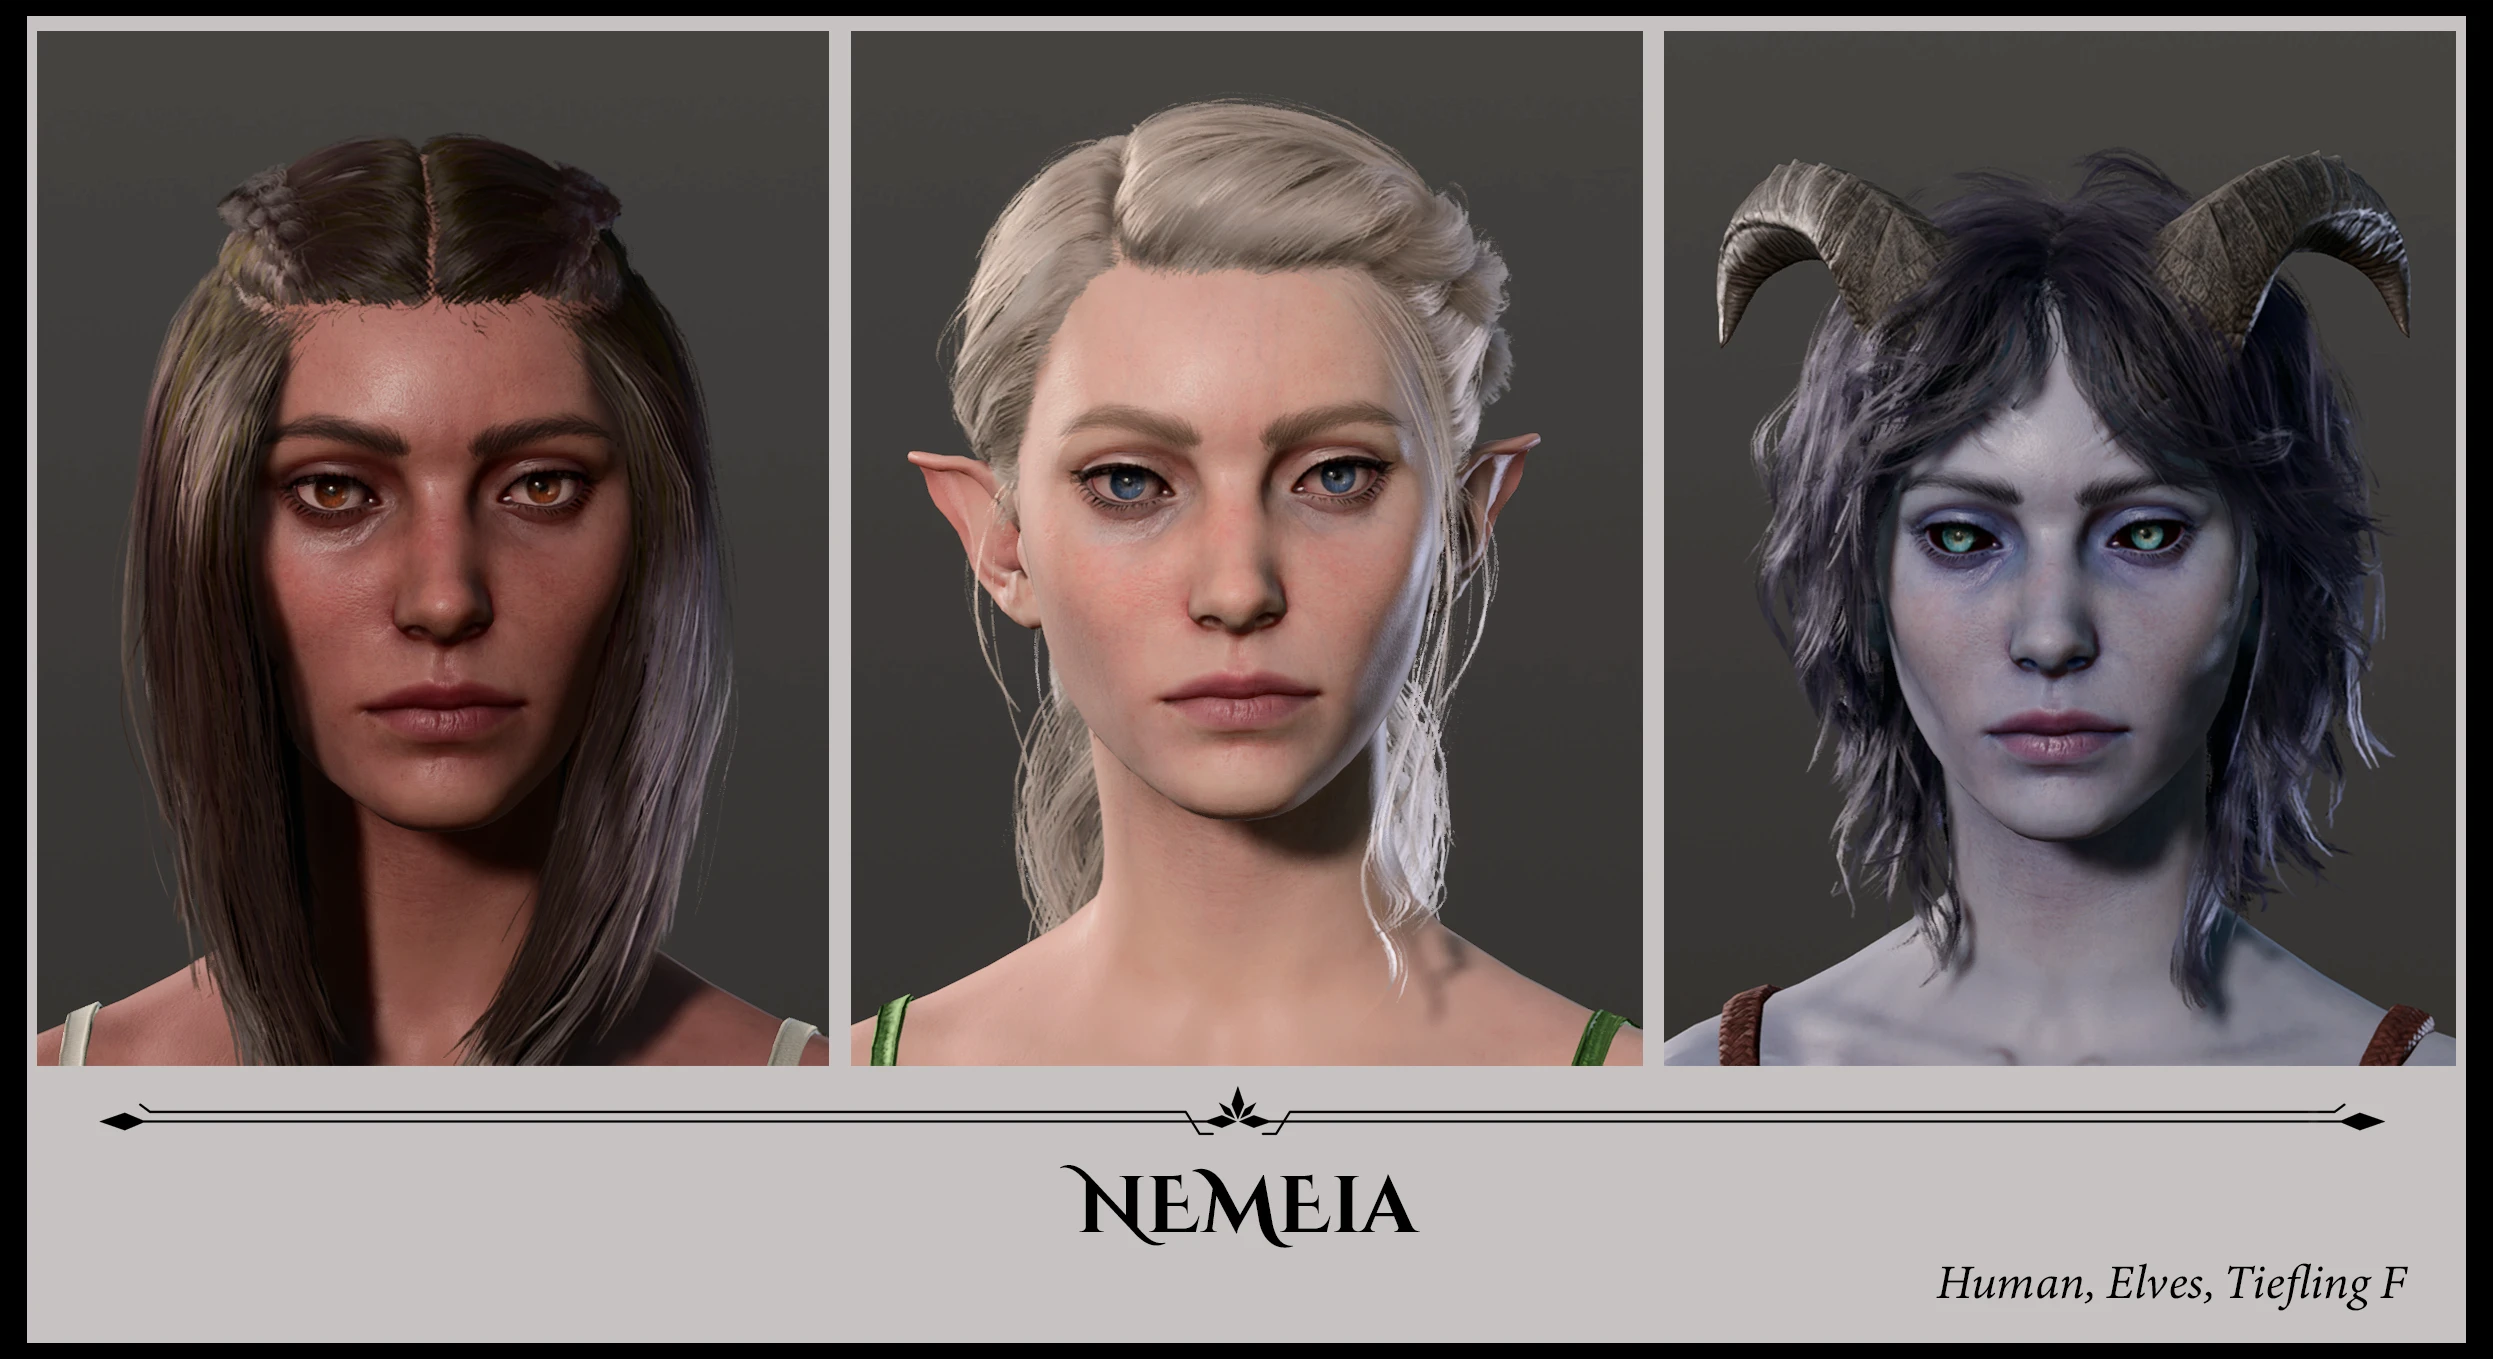 Aloija's Faces of Faerun mod showing off three different faces to be used in Baldur's Gate 3's character creator